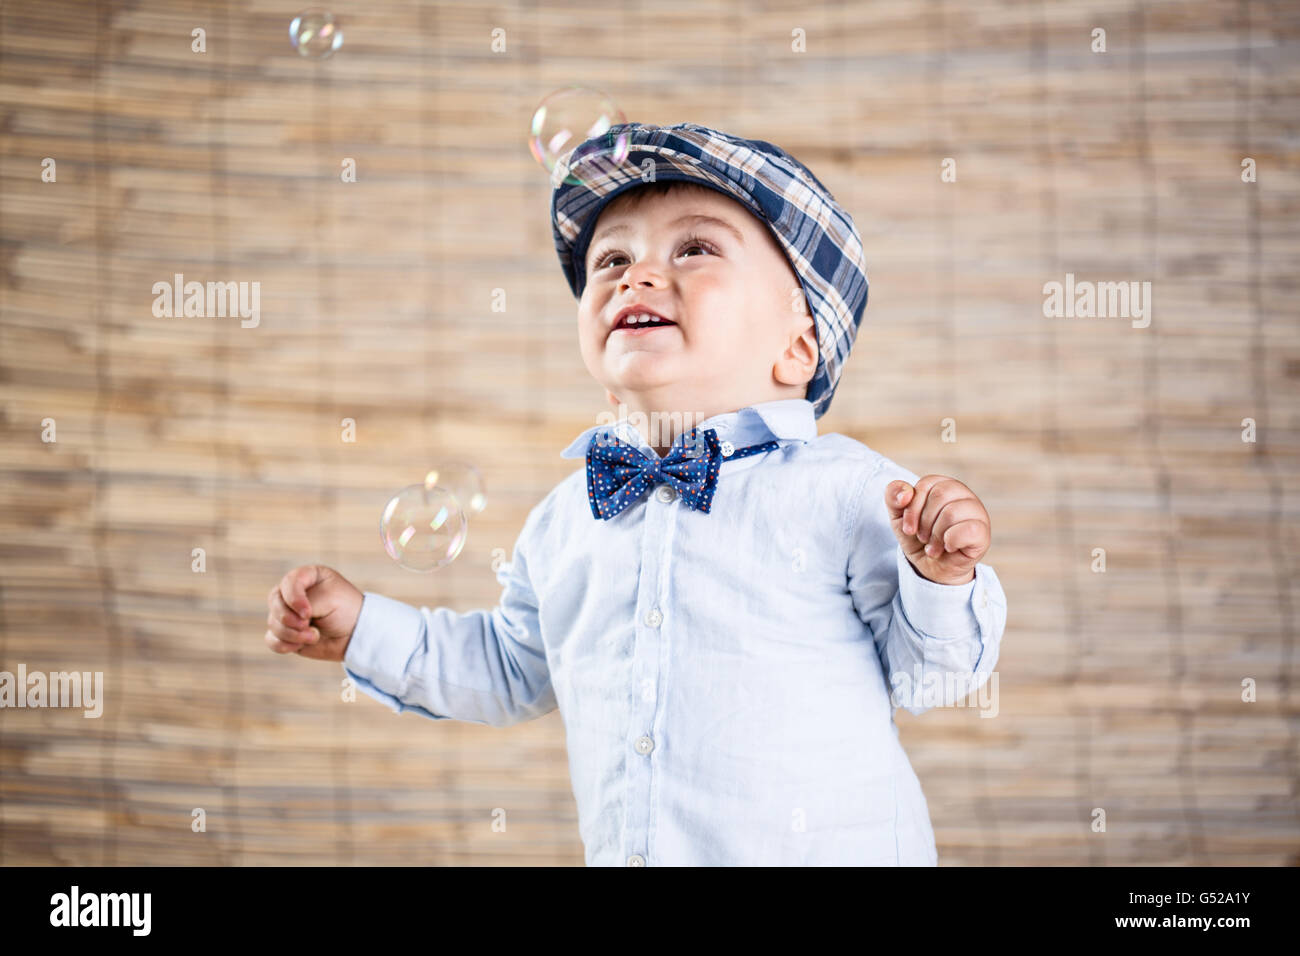 baby boy with gentleman outfit on bamboo background Stock Photo